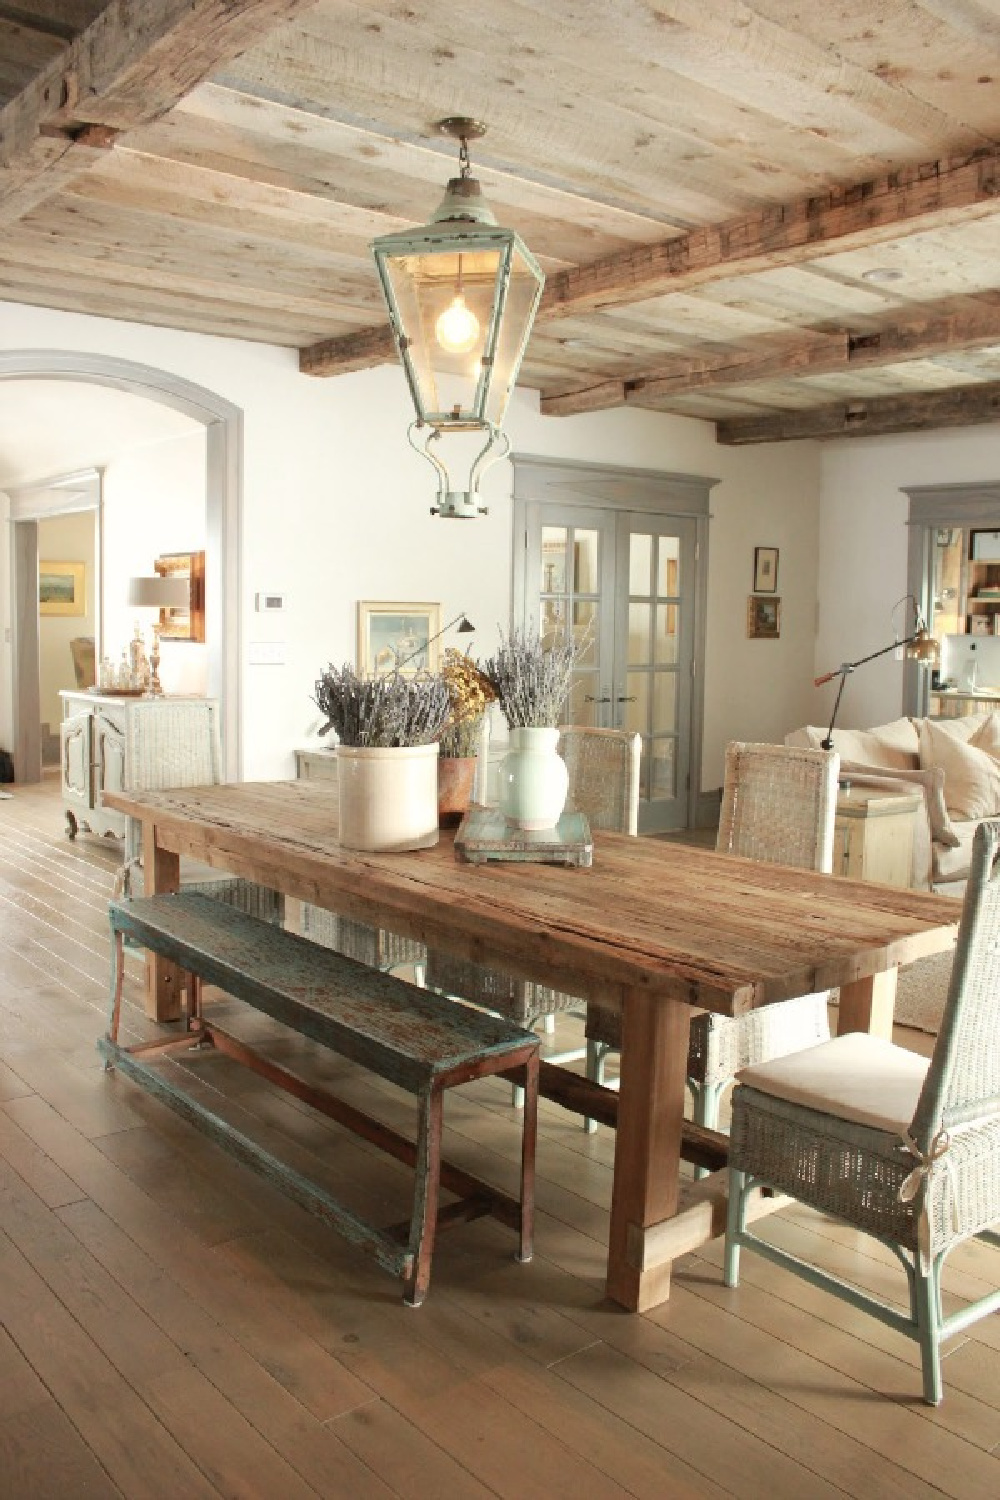 Farm table in breakfast dining area in rustically elegant European country cottage - Desiree of Beljar Home and DecordeProvence. #europeancountry #cottagestyleinteriors